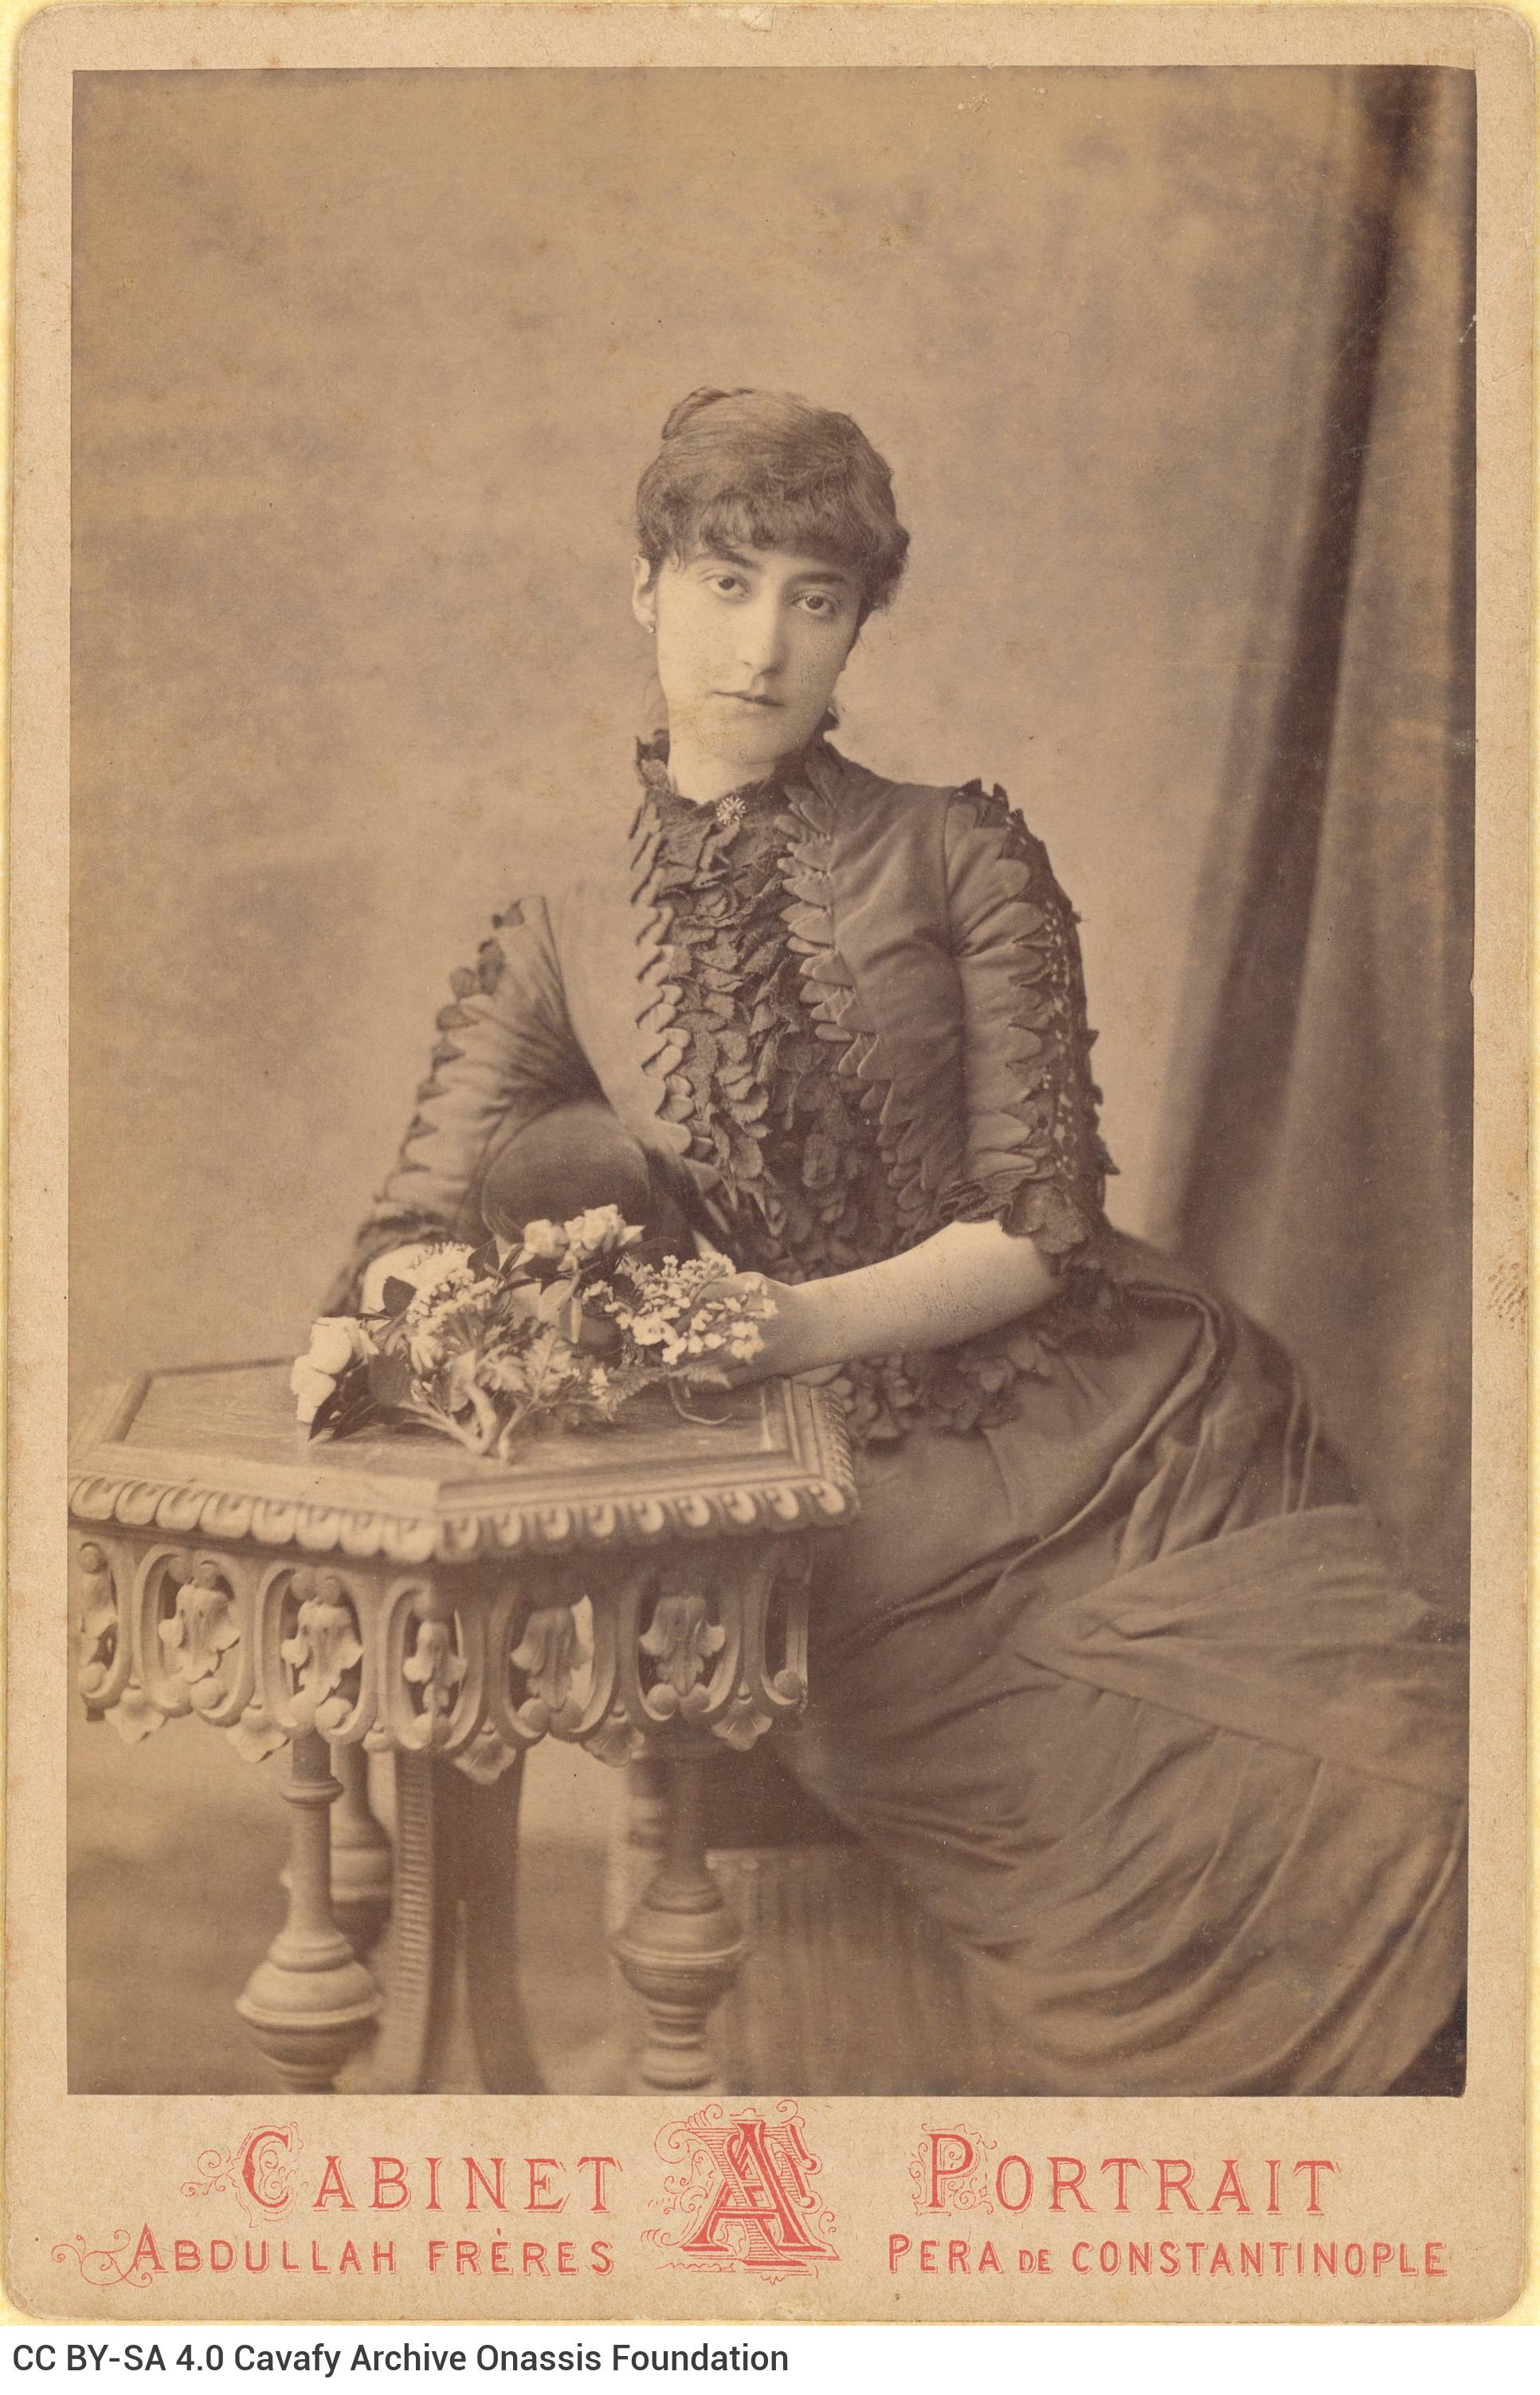 Photographic portrait of a seated woman with her hands on a table, holding flowers, from the Abdullah Frères photo shop of I